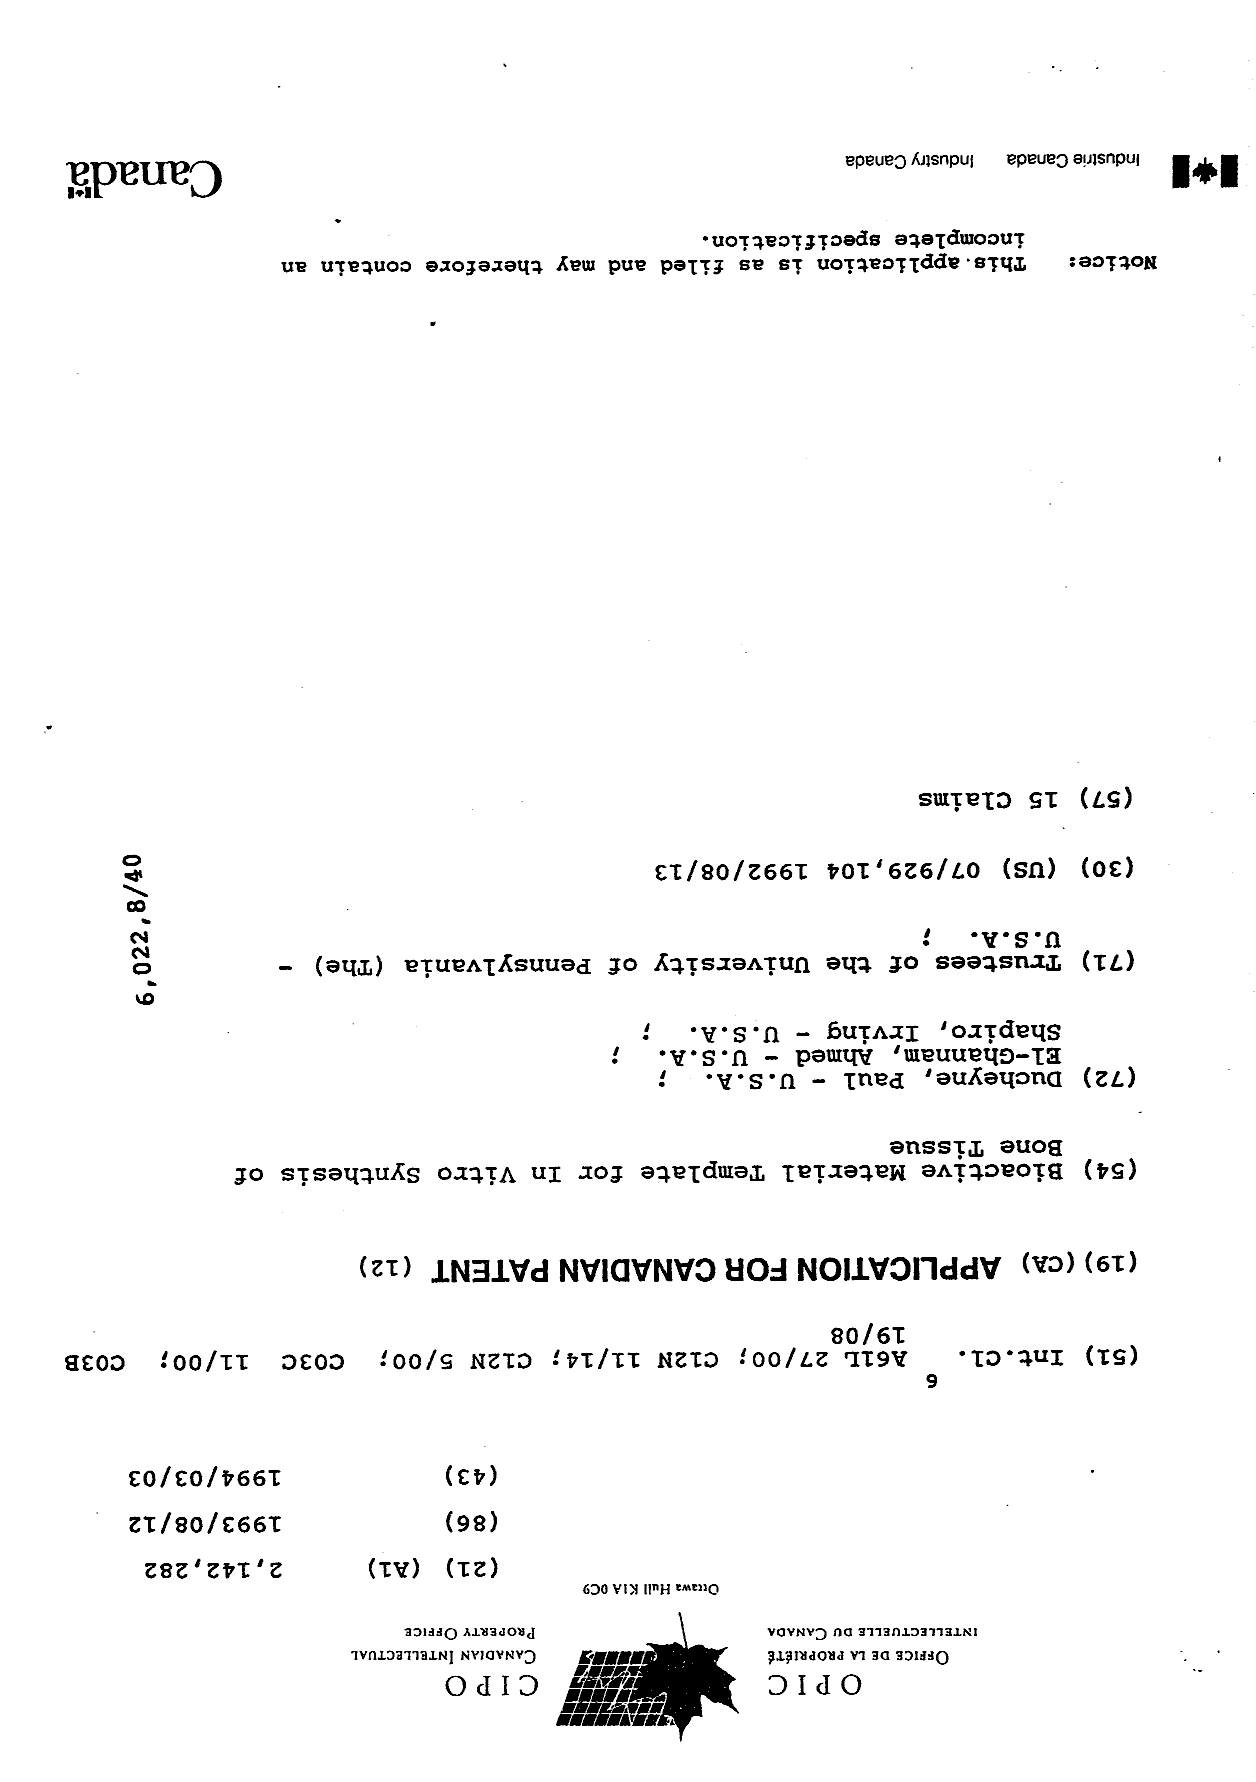 Canadian Patent Document 2142282. Cover Page 19941216. Image 1 of 1